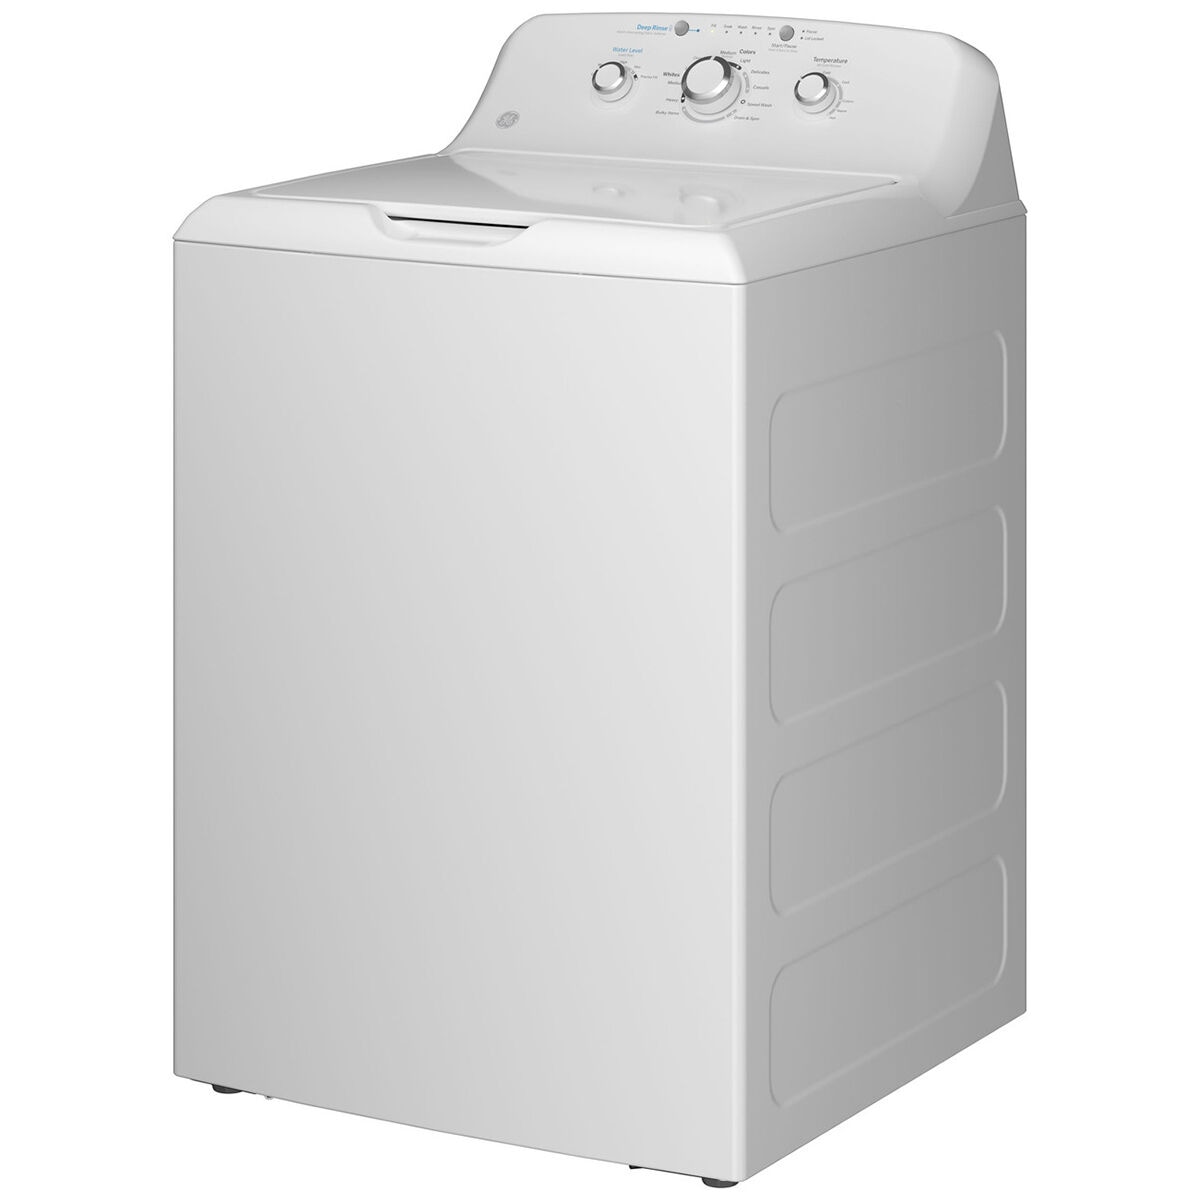 GE 27 in. 4.0 cu. ft. Top Load Washer with Stainless Steel Basket, Water  Level Control & Heavy Duty Agitator - White